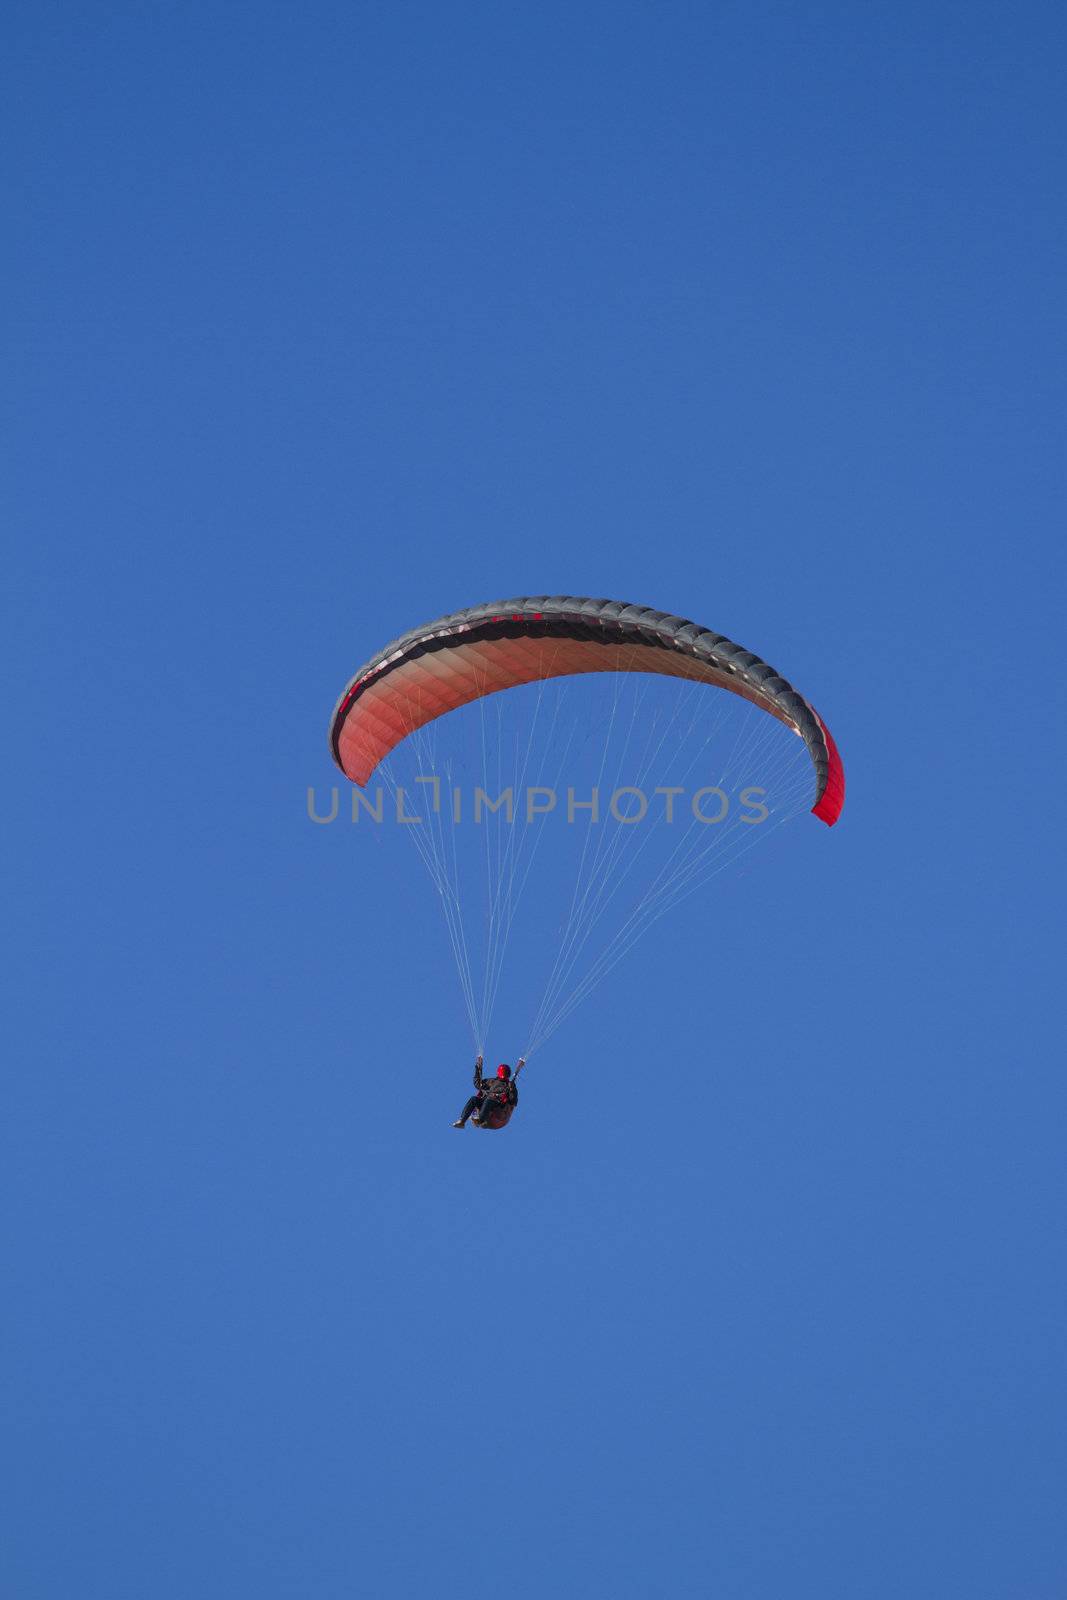 A paraglider takes to the sky. Shot from below against a blue sky.